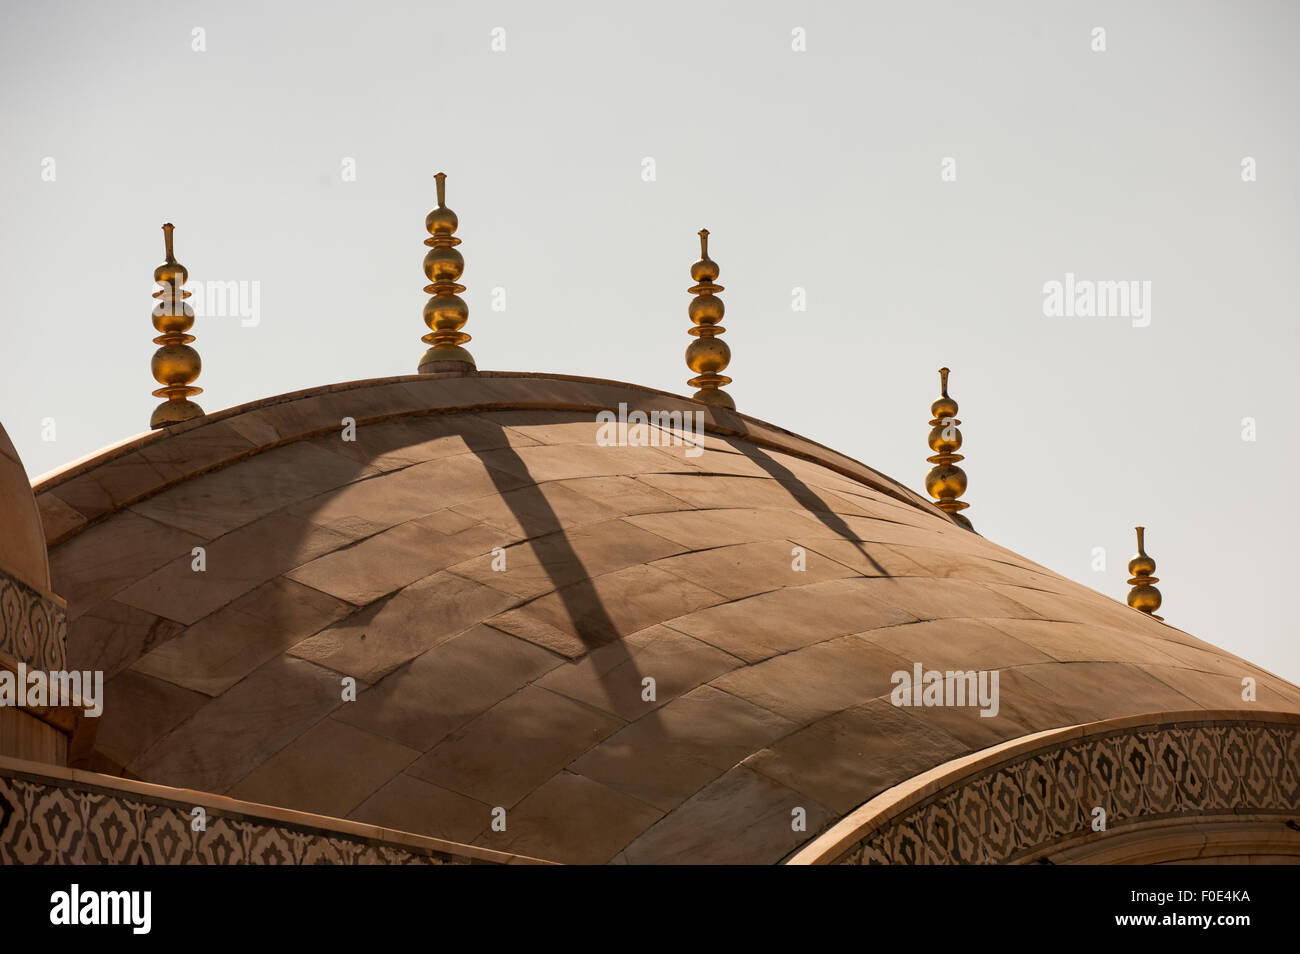 Jaipur, India. Detail of stone slab roof with multiple pinnacles formed of balls and discs in the Amber (Amer) Fort. Stock Photo